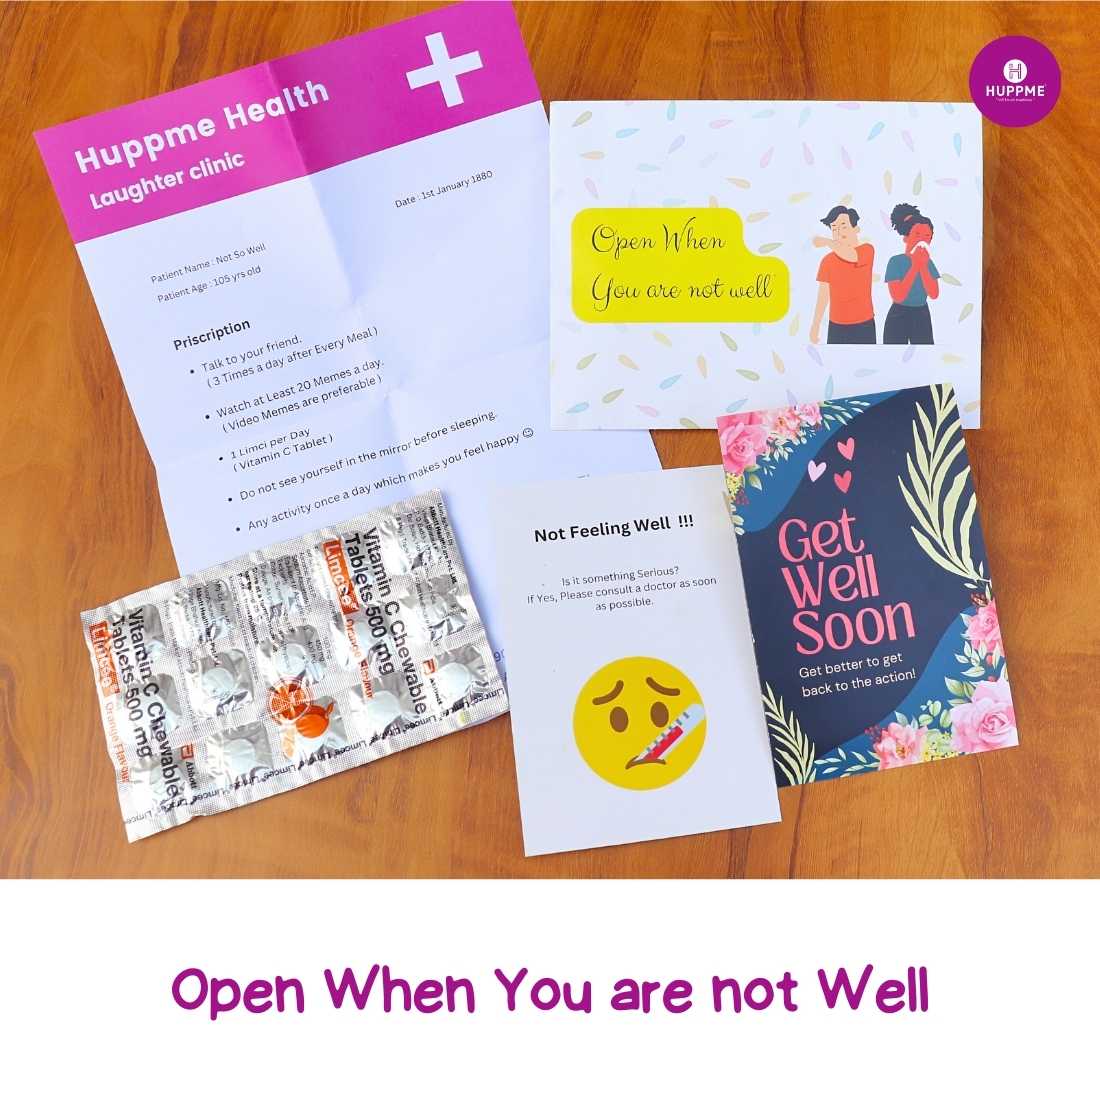 Open When You are not Well